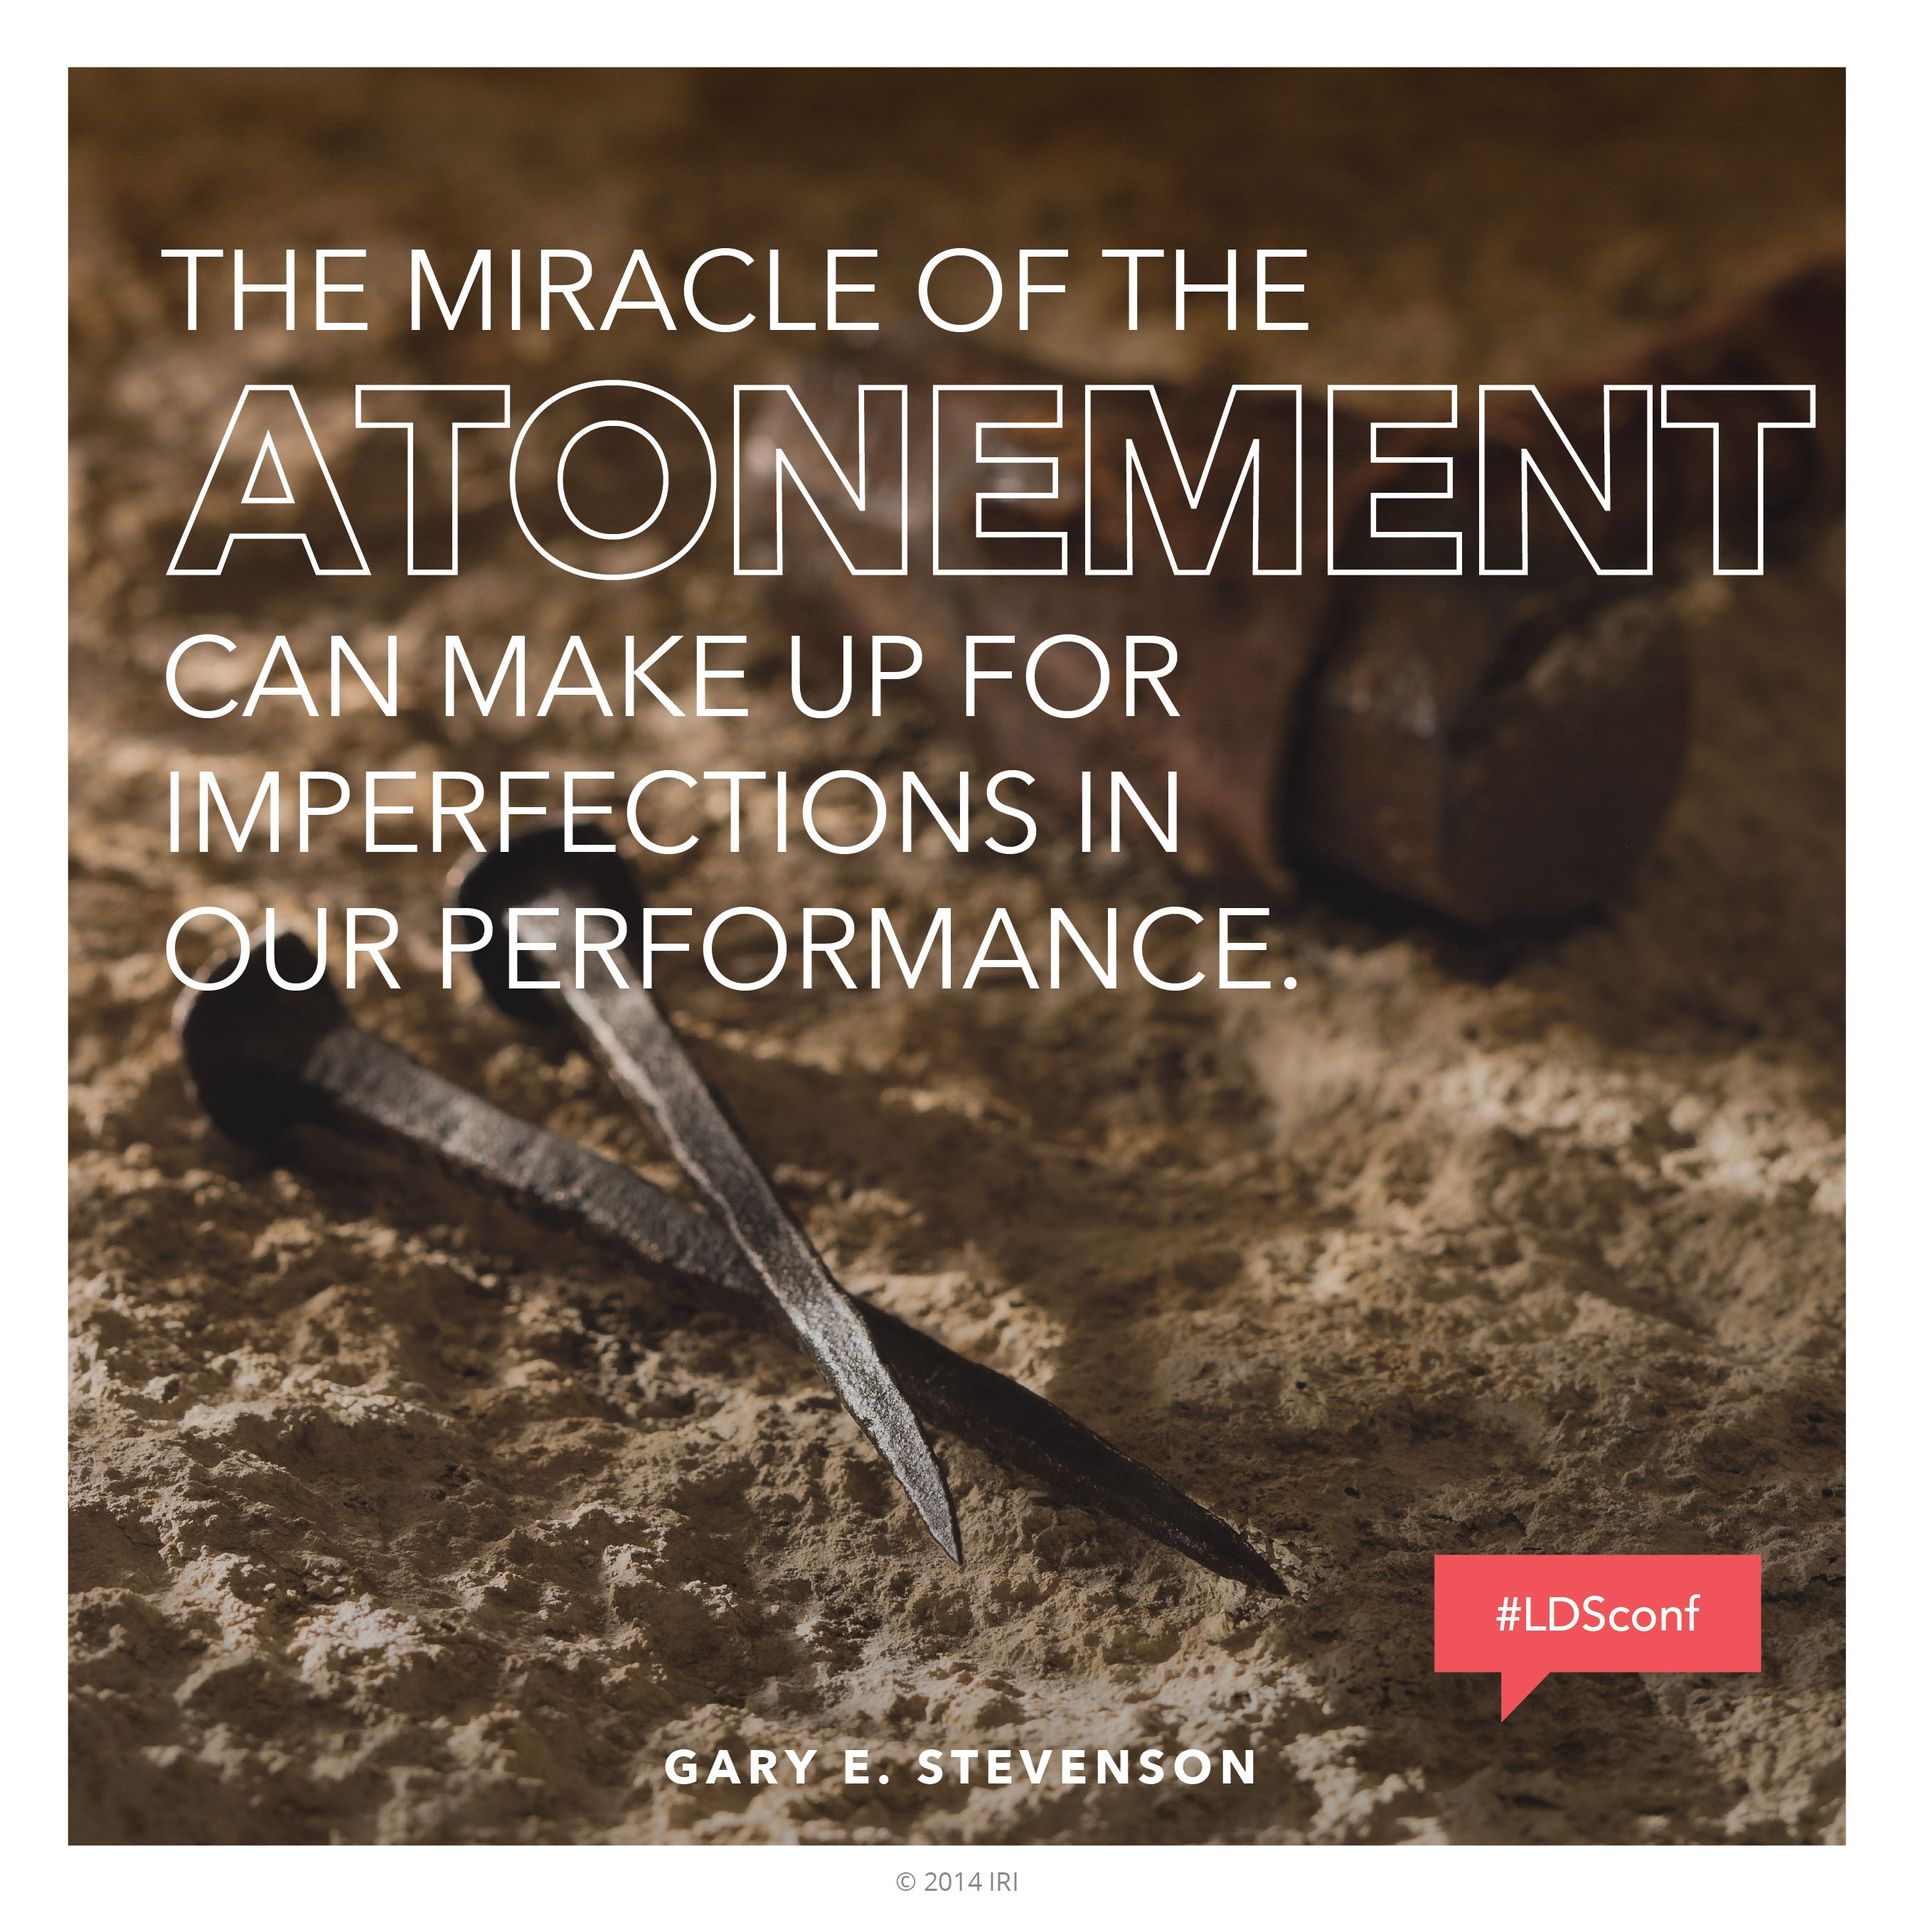 “The miracle of the Atonement can make up for imperfections in our performance.”—Bishop Gary E. Stevenson, “Your Four Minutes” © undefined ipCode 1.